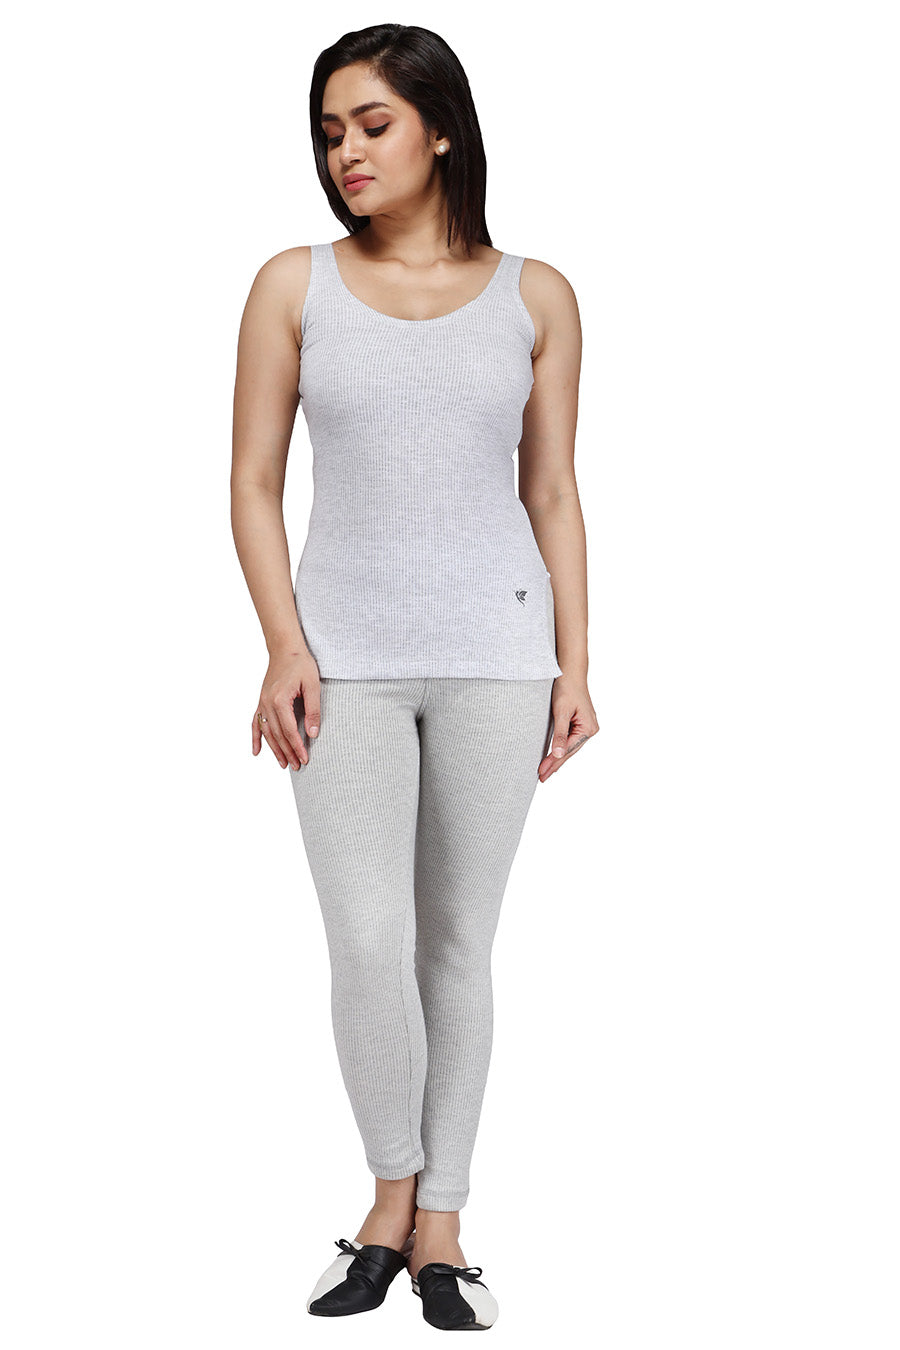 Comfort Lady Thermal Camisole